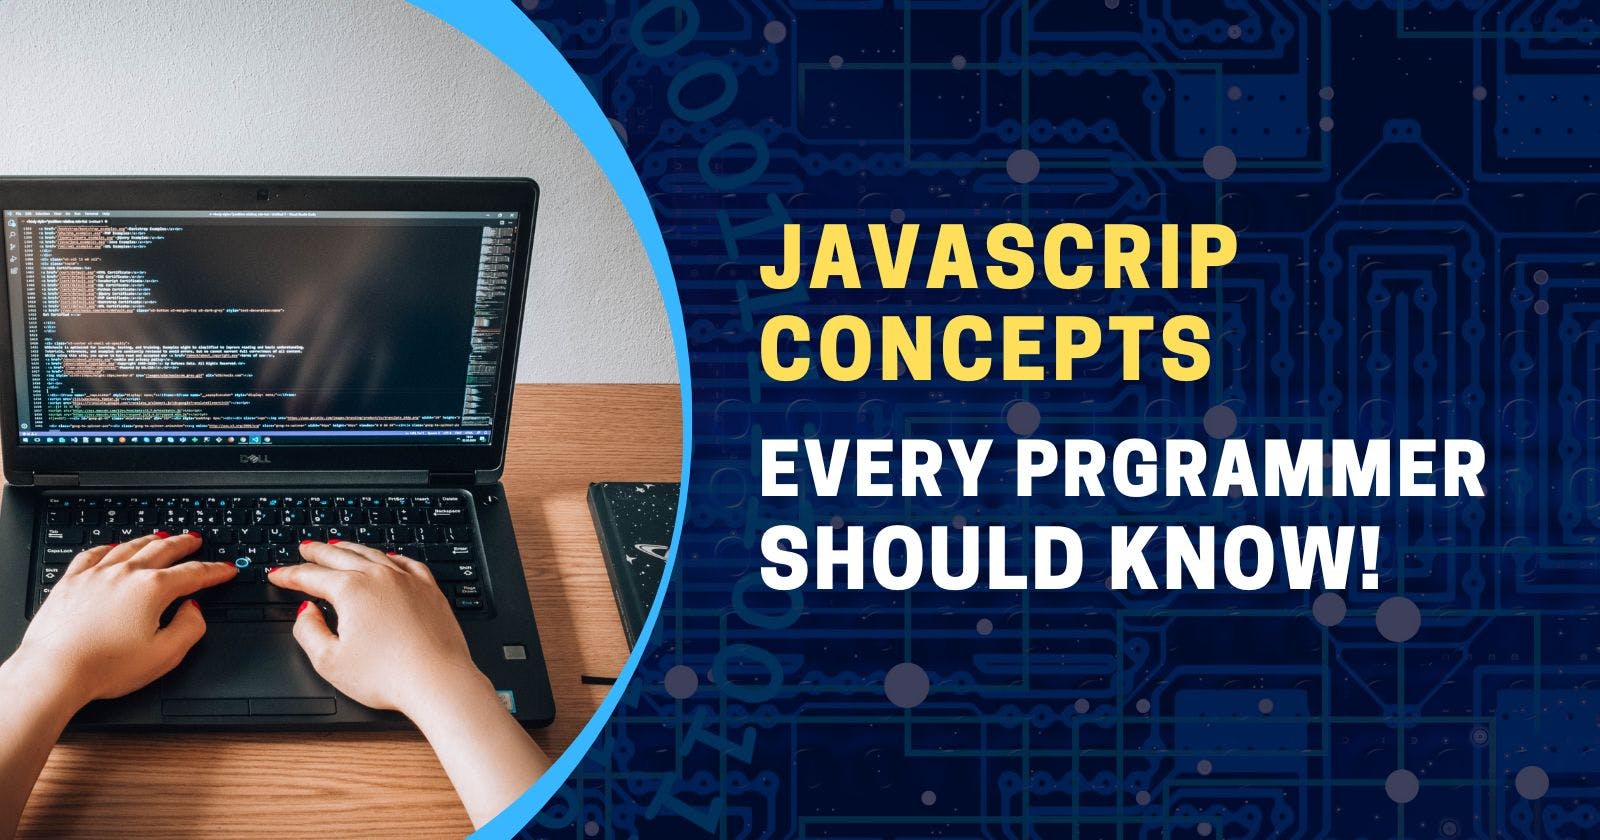 Javascript Concepts Every Programmer Should Know